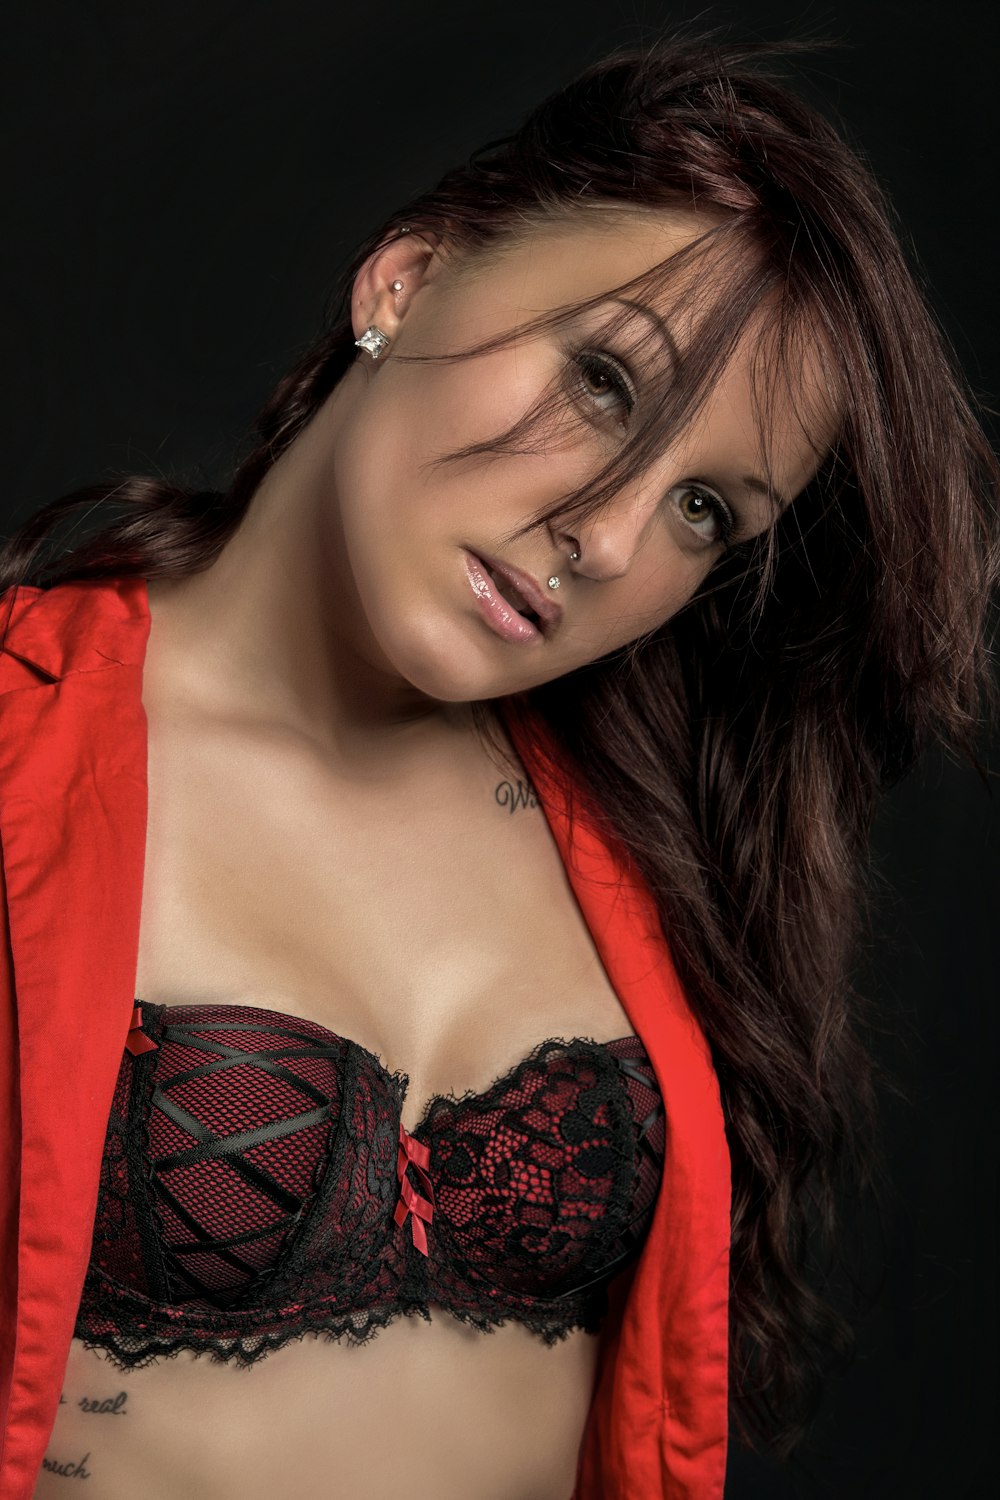 woman in red and black floral brassiere